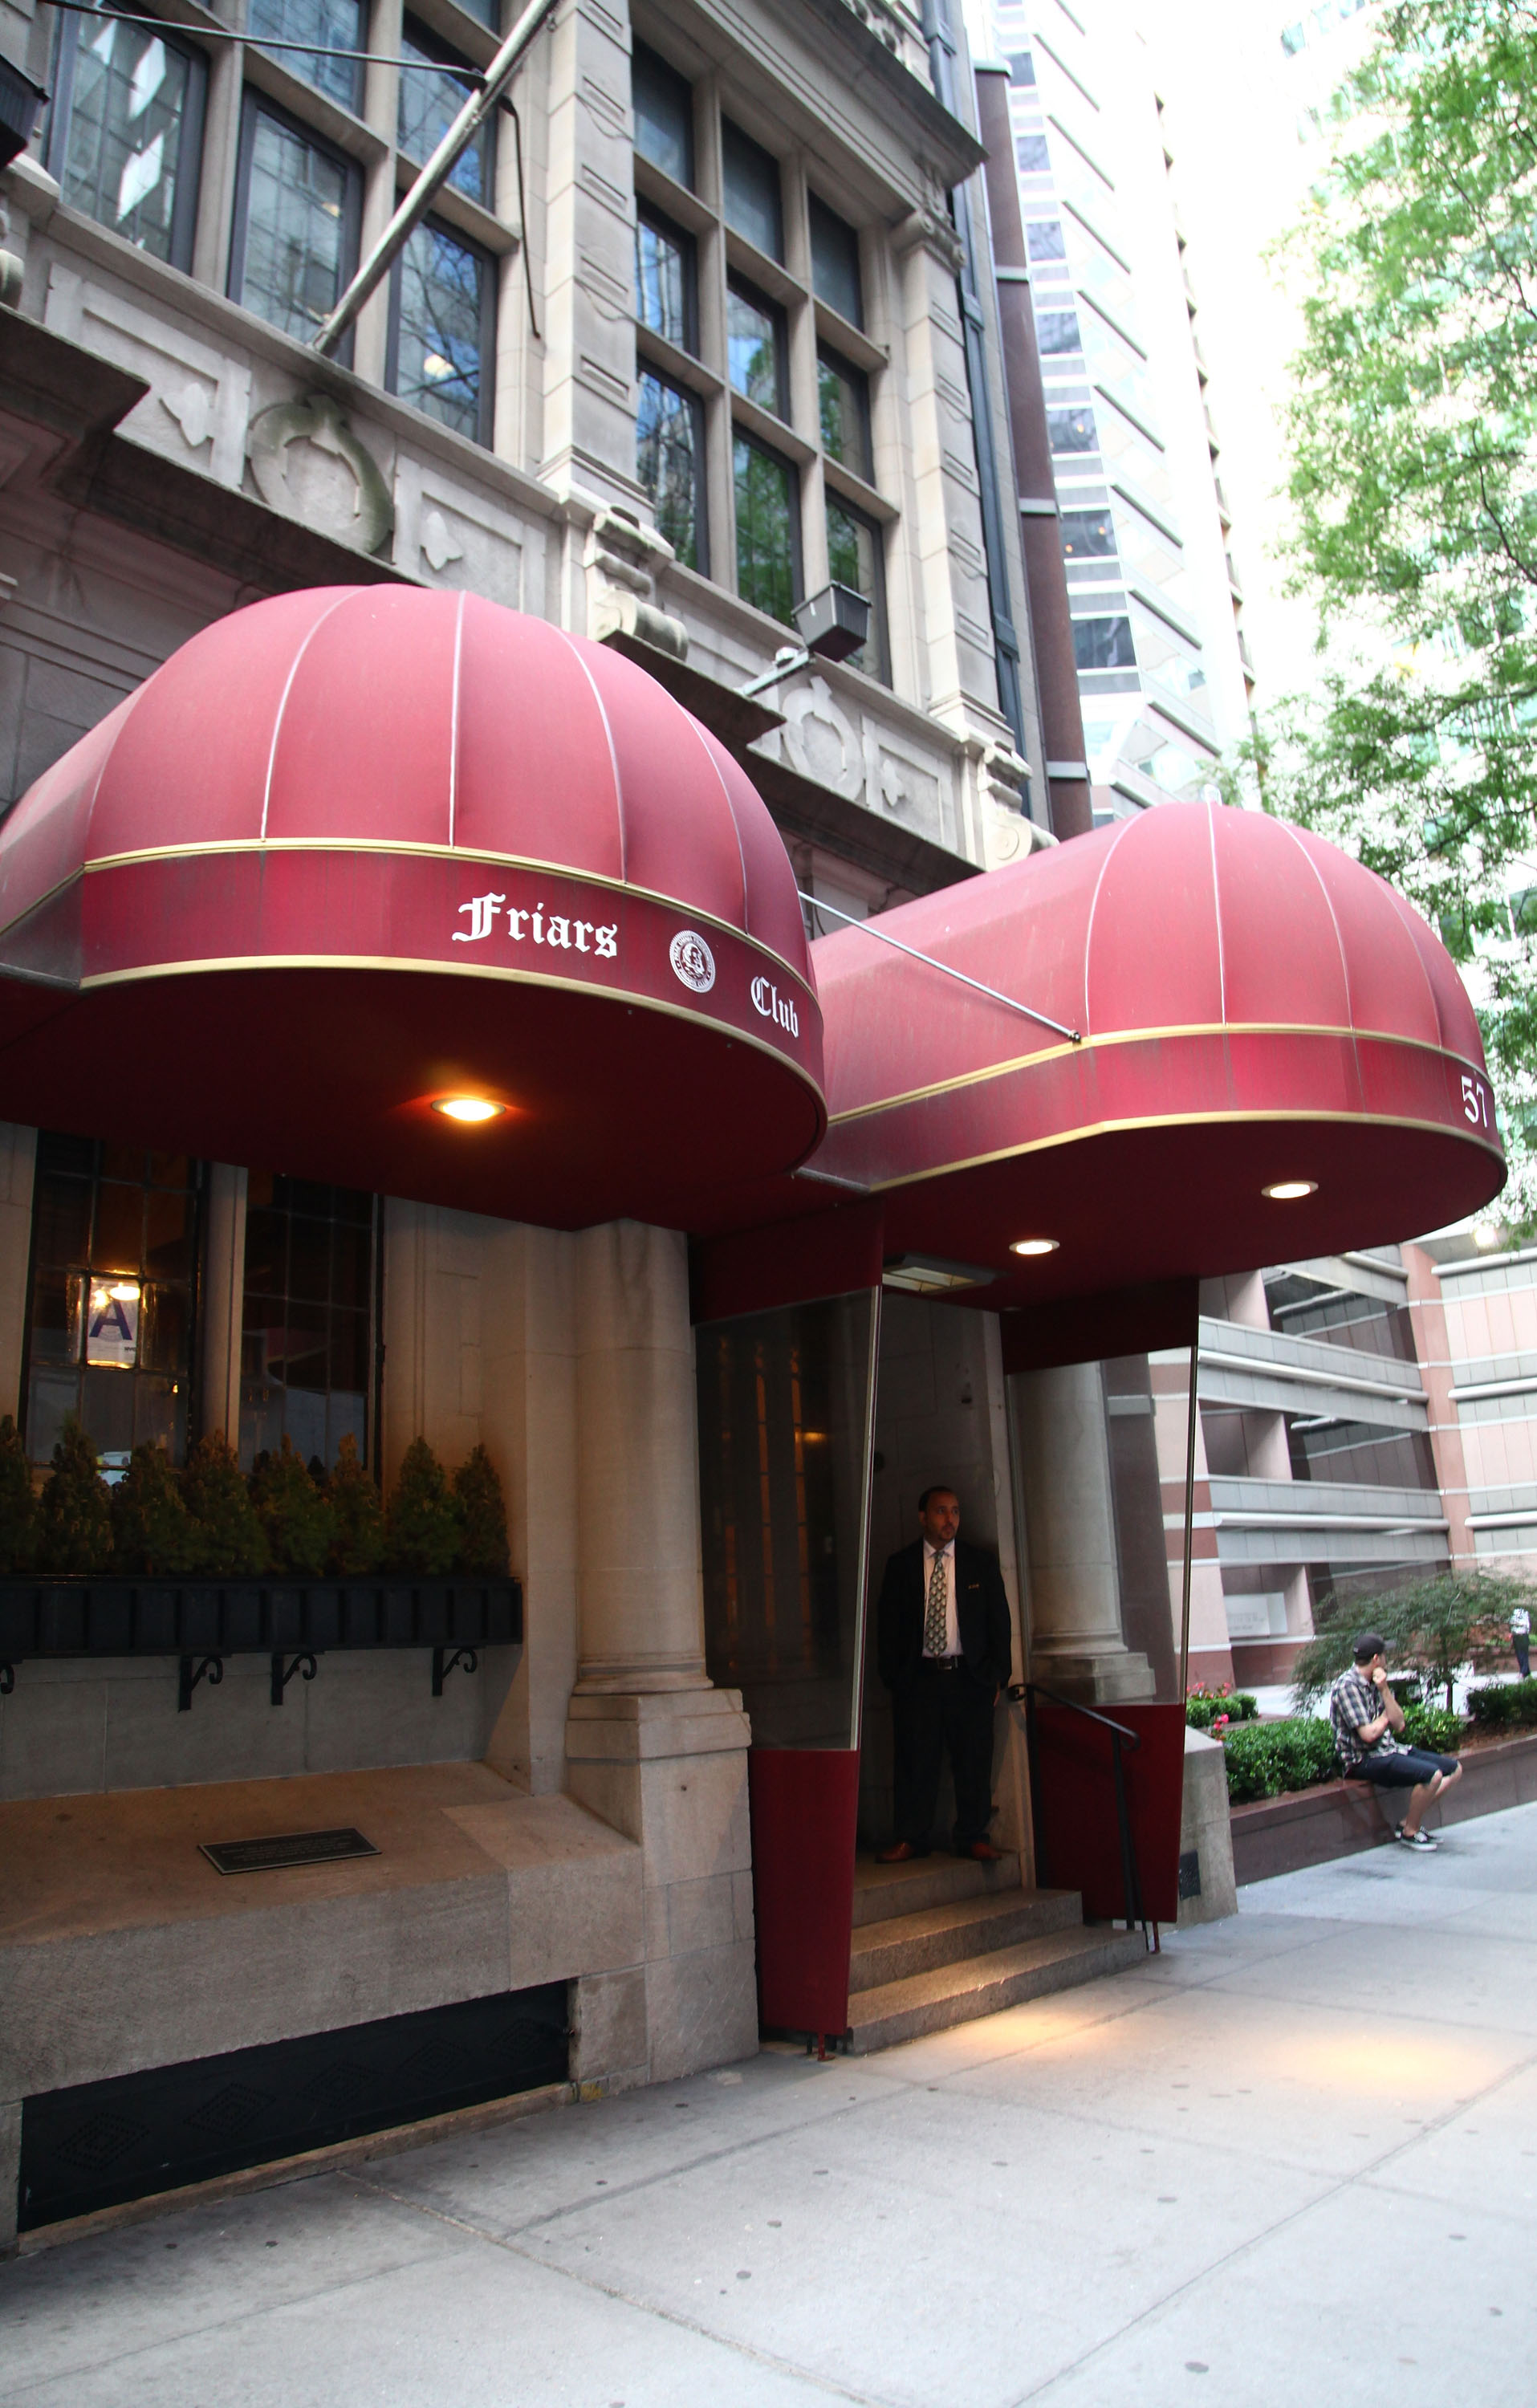 NEWSLINE: The legendary Friars Club is in danger of foreclosure